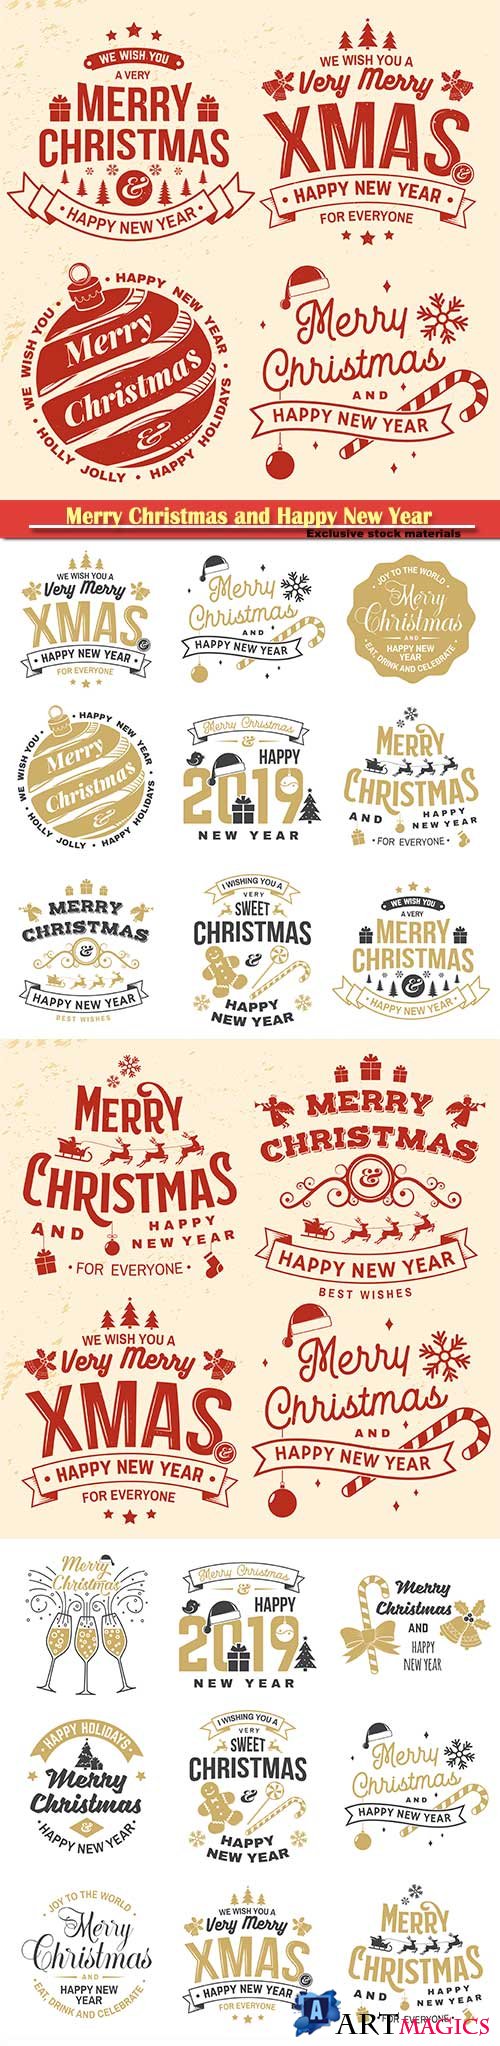 Merry Christmas and 2019 Happy New Year stamp, sticker set